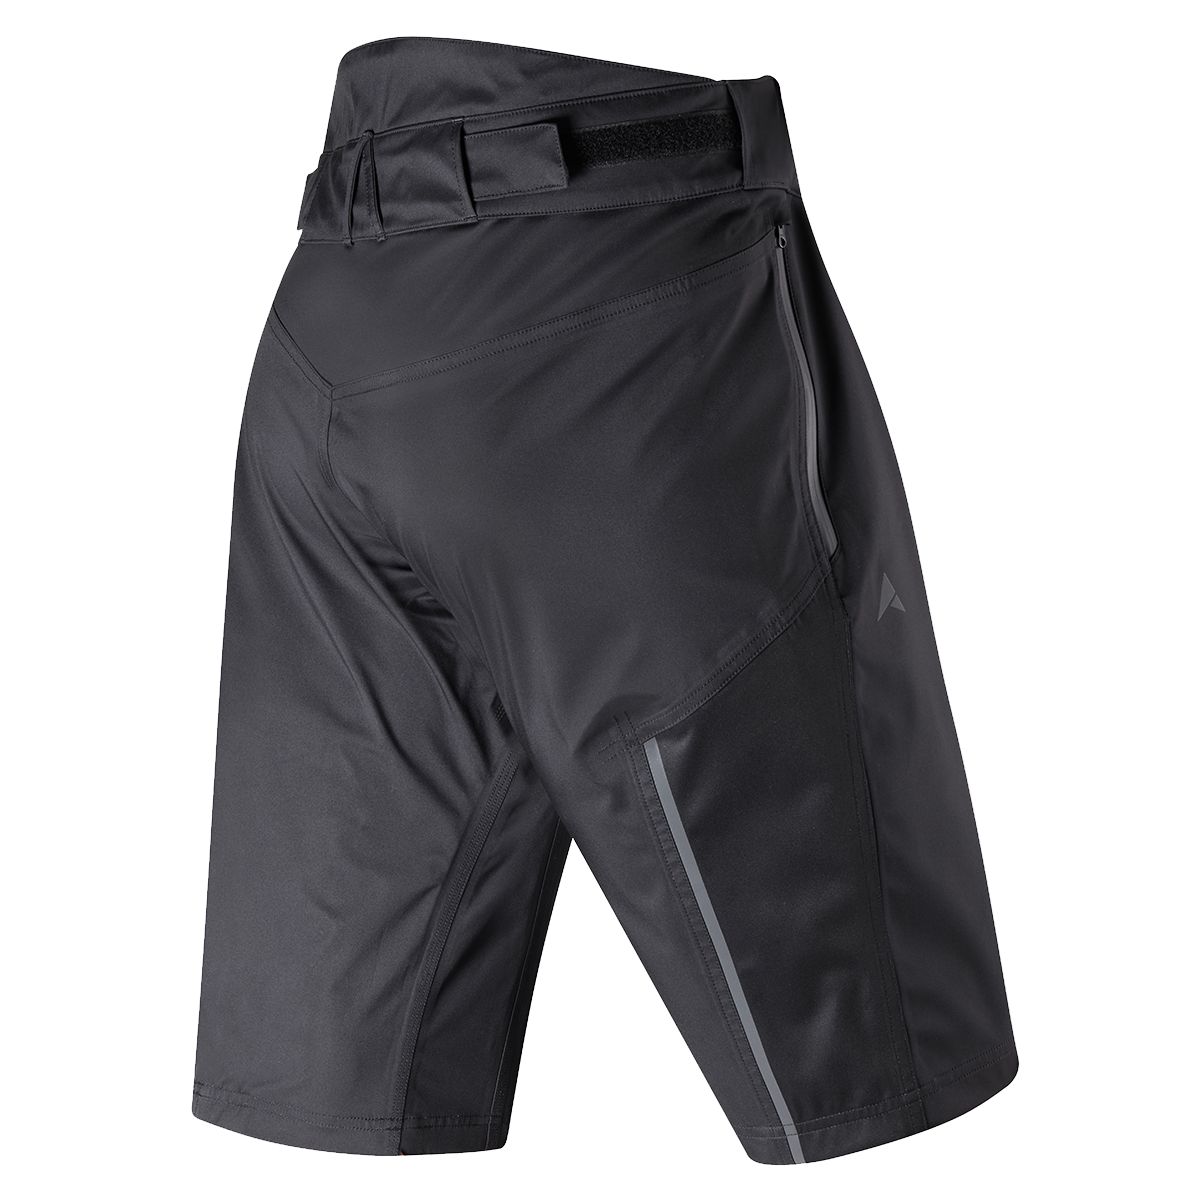 Altura All Roads Waterproof Trail Shorts Extra Large - £33.75 | Shorts ...